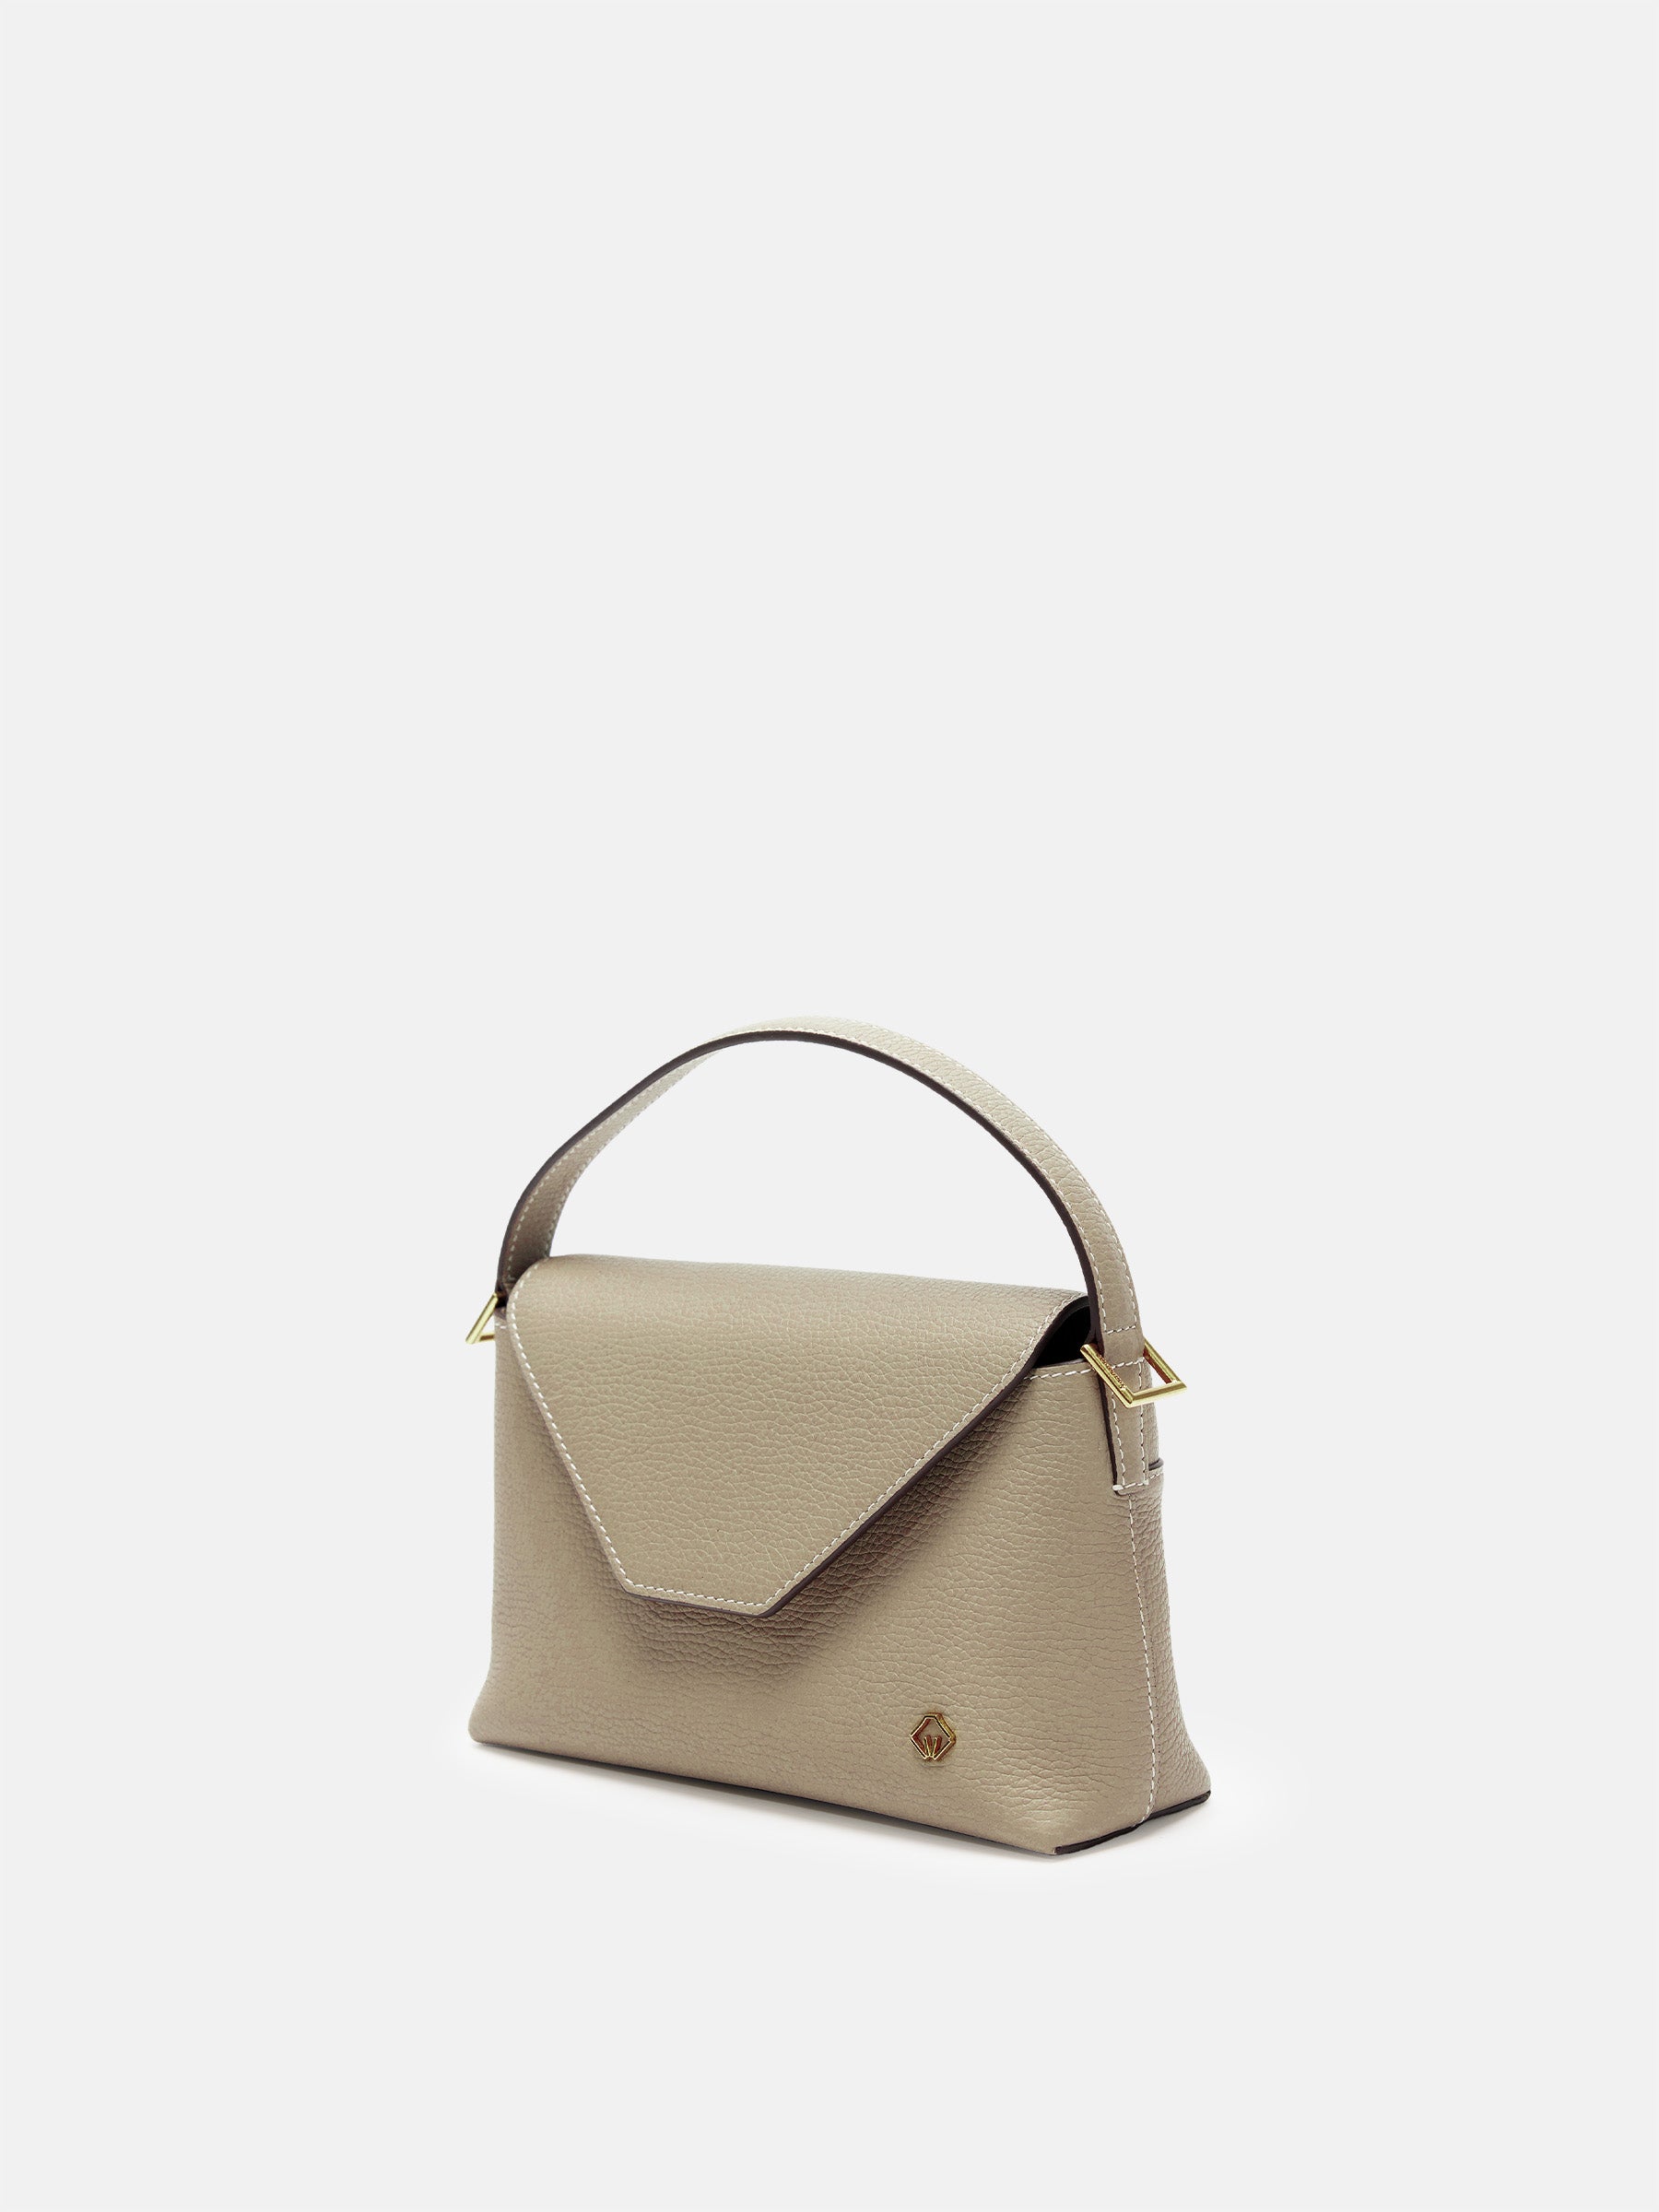 The Small Icon Satchel Bag